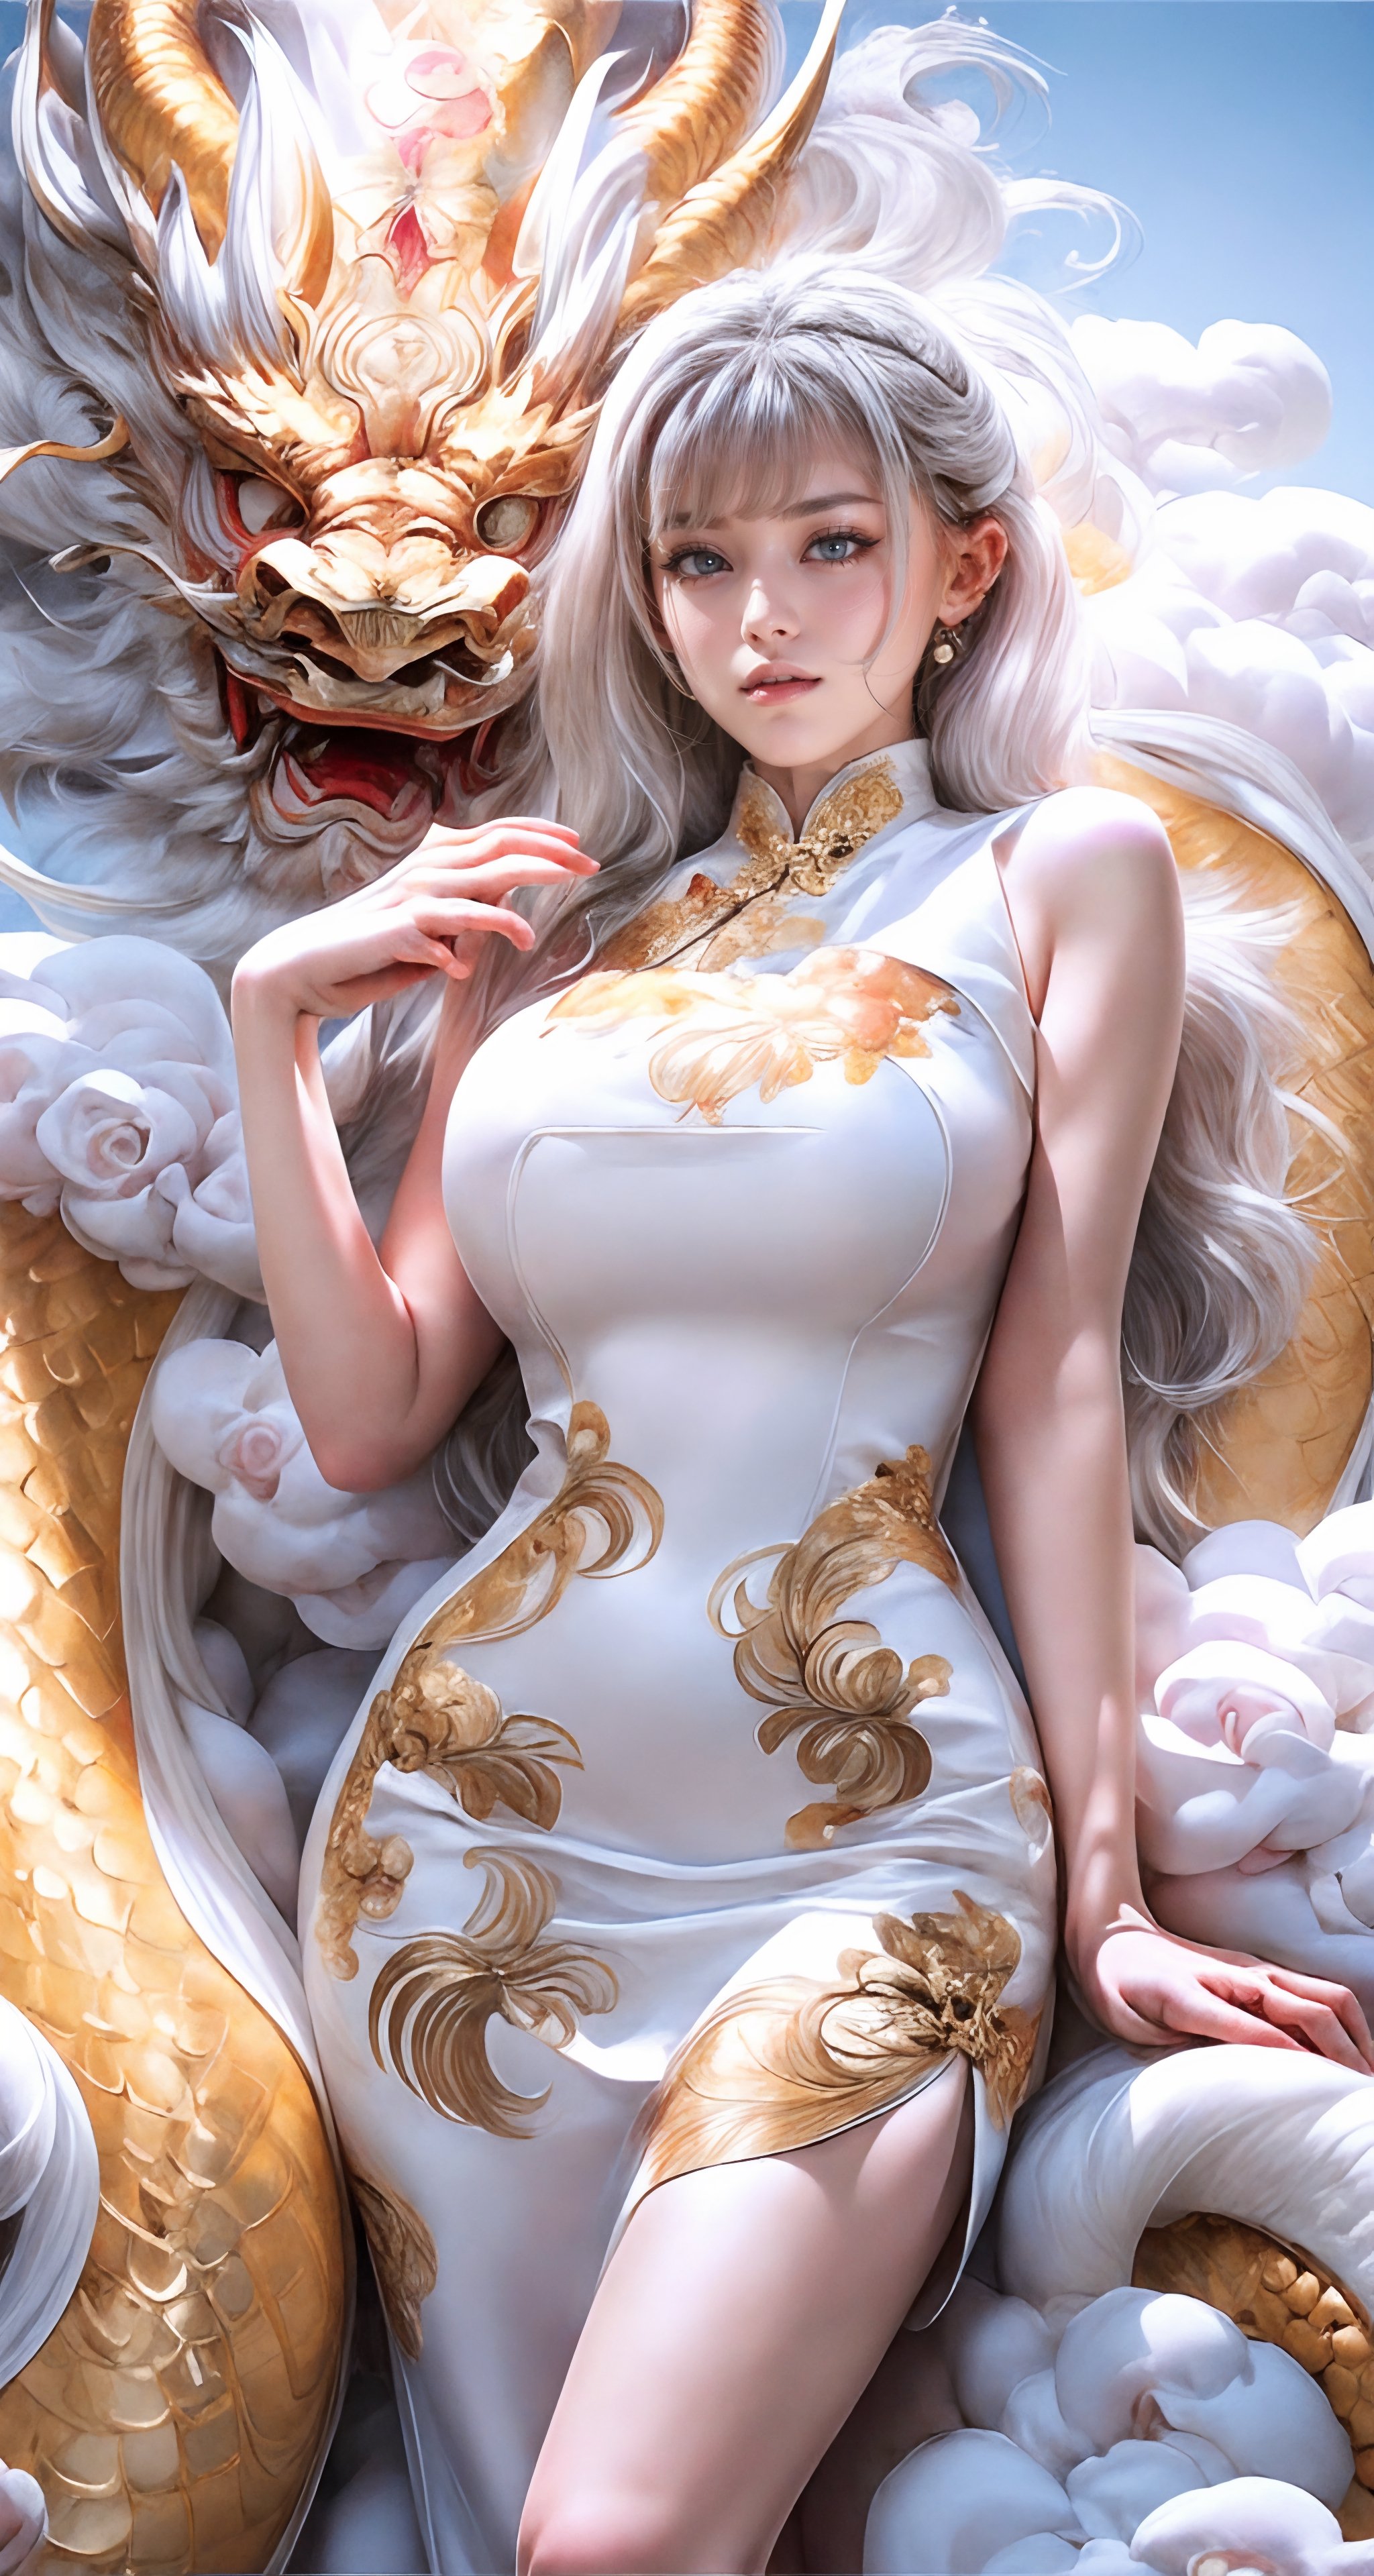 unparalleled masterpiece, perfect artwork, 8k, Ultra realistically, by Alphonse Mucha, art nouveau, 
(long cheongsam:1) , (pearl dress:1.3), (tight dress:1.2), gold leaf covered, dragonbaby, (chinese dragon:1.3), Gorgeous, (huge breasts :1.2), legs,
extremely detailed, (bangs:1.4), look at viewer,
long hair,  (white hair:1.3), mature female,  (smile:0.8), white skin, skinny,  moles, earrings, China, flowers, floral patterns, color pattern, sunlight, cloud, luxury, twine, ocean, wedding,